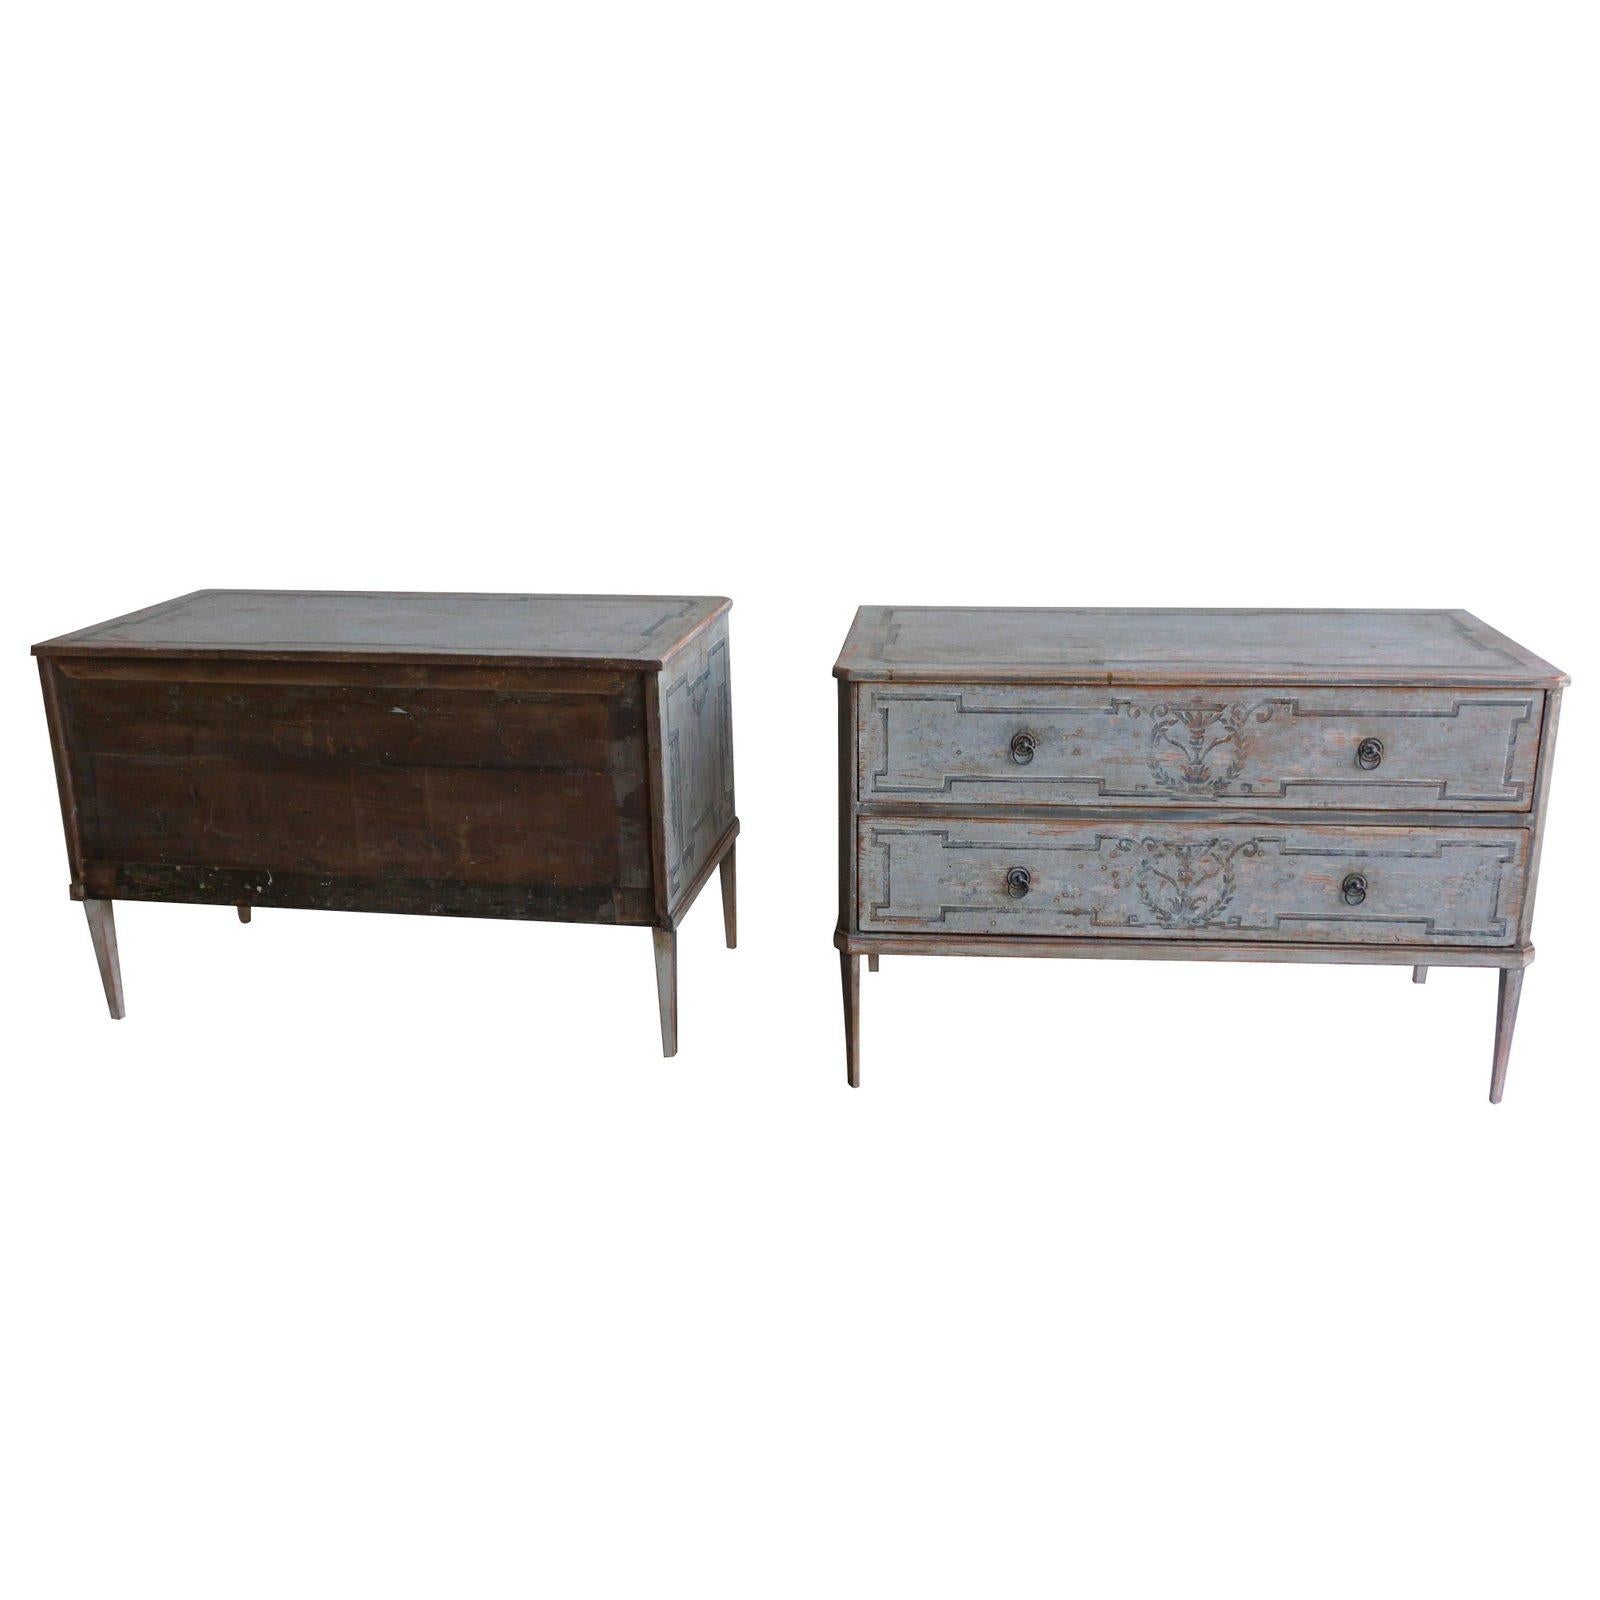 A pair of late 19th century of detailed Swedish neoclassical chests of drawers, grey-blue hand painted, two drawers with brass ring fittings tapering square legs. Wear consistent with age and use, circa 1880 Sweden, Scandinavian.